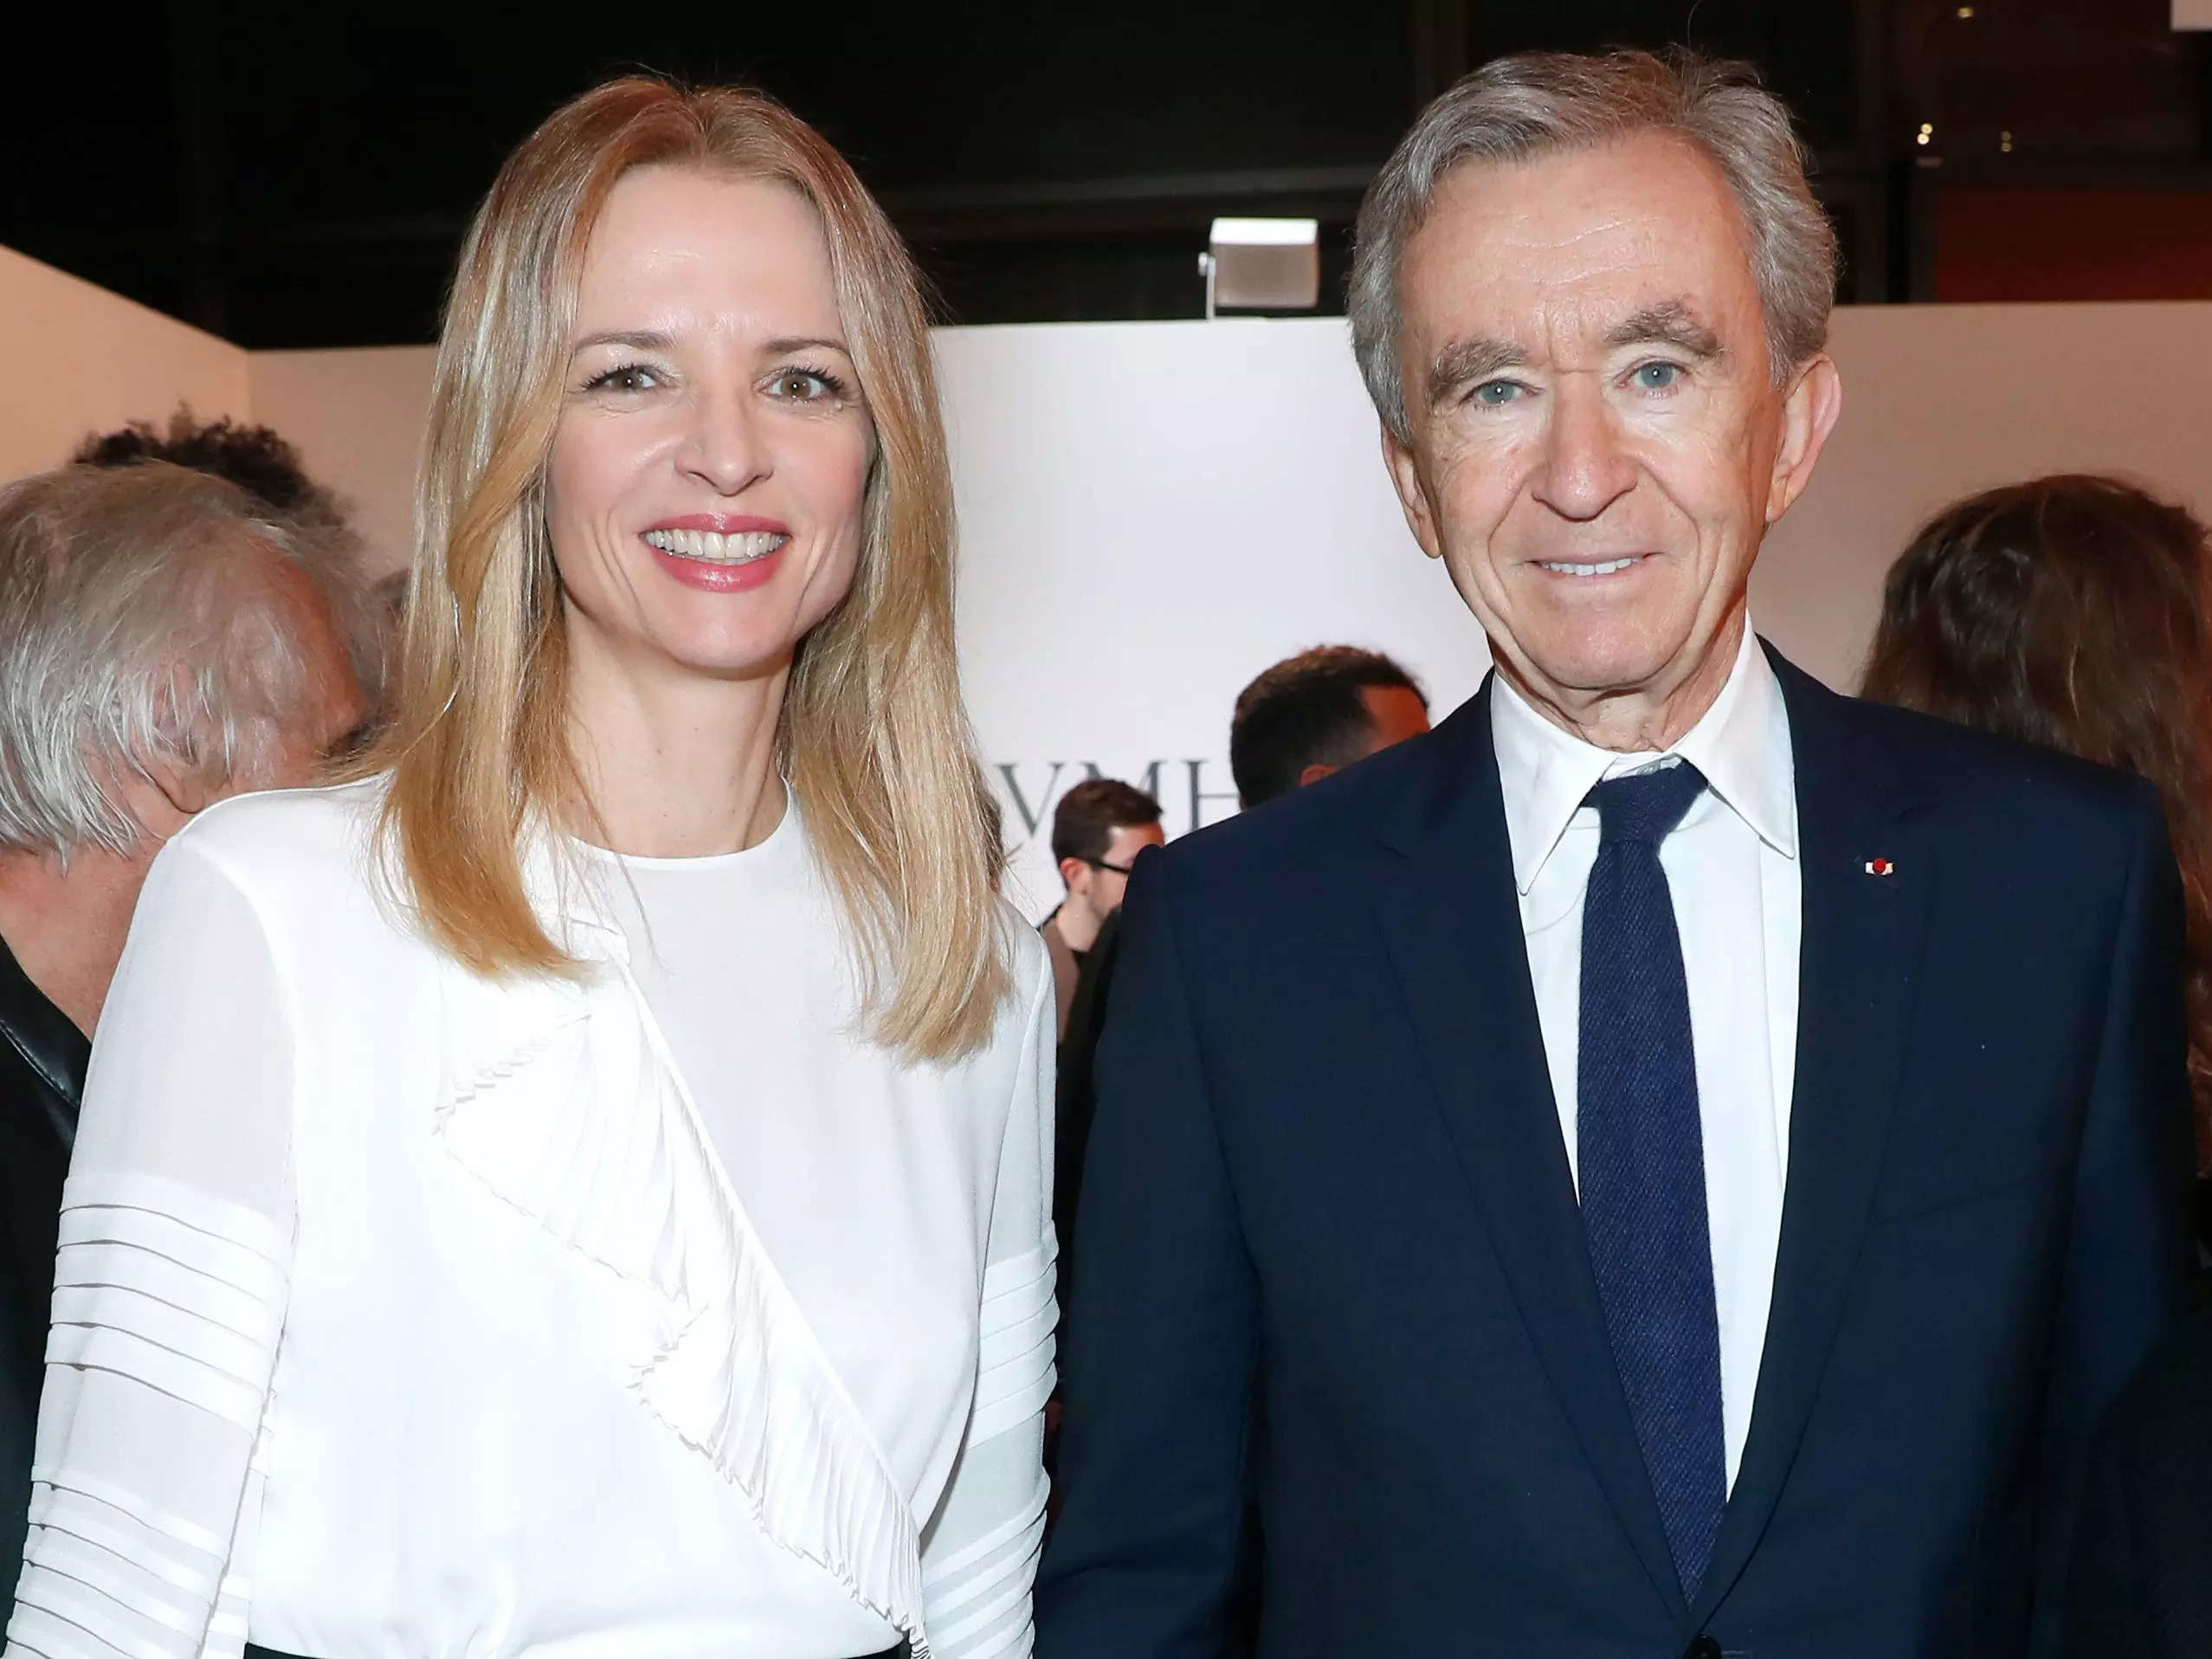 Dior management shakeup: Bernard Arnault, the world's richest person,  appoints daughter CEO